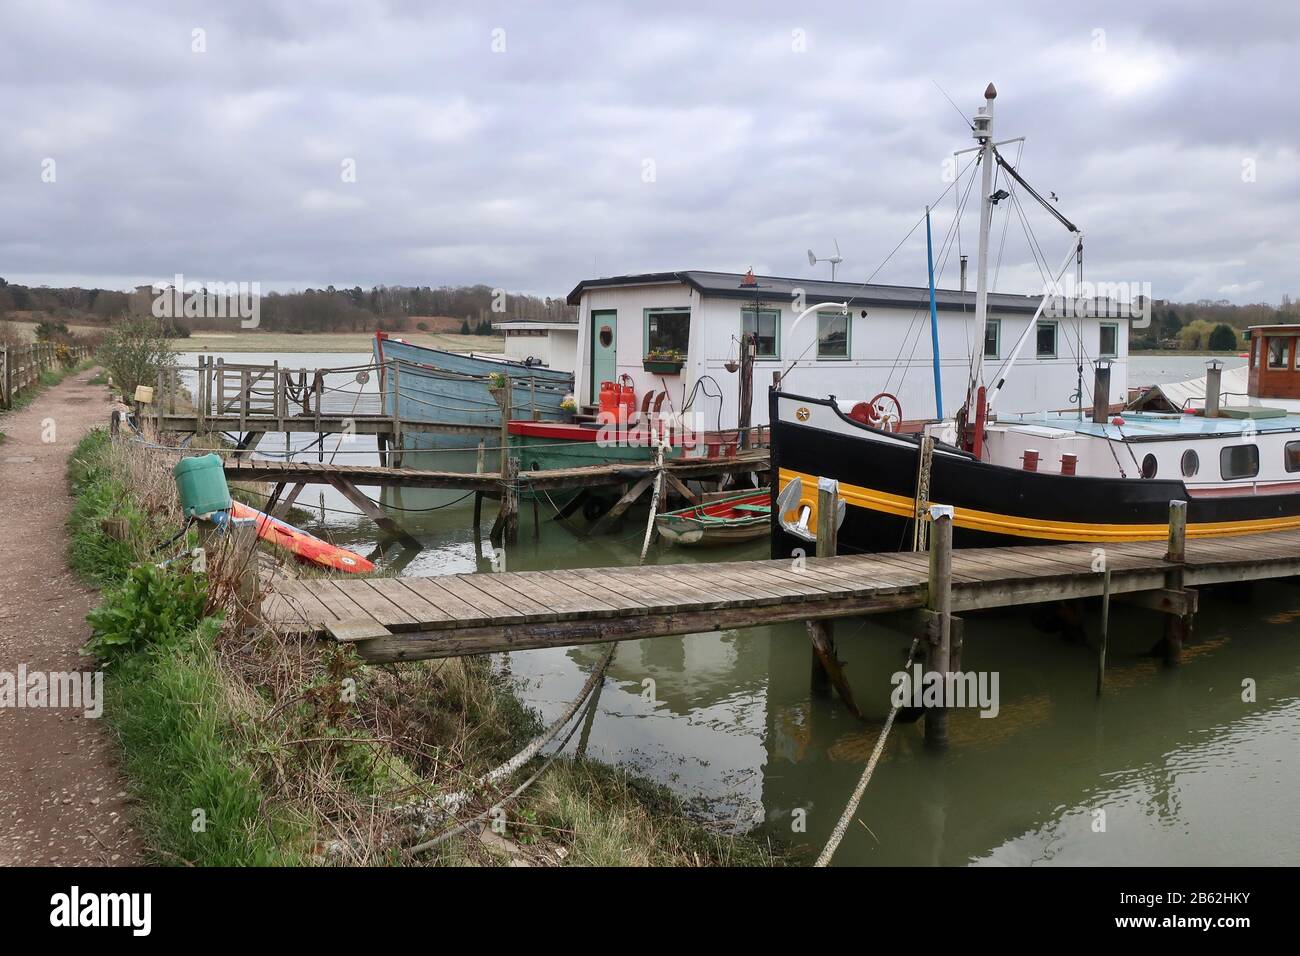 Woodbridge, Suffolk, UK - 9 March 2020: Houseboats seen on a wet and windy afternoon walk alongside the River Deben from Woodbridge to Melton. Stock Photo